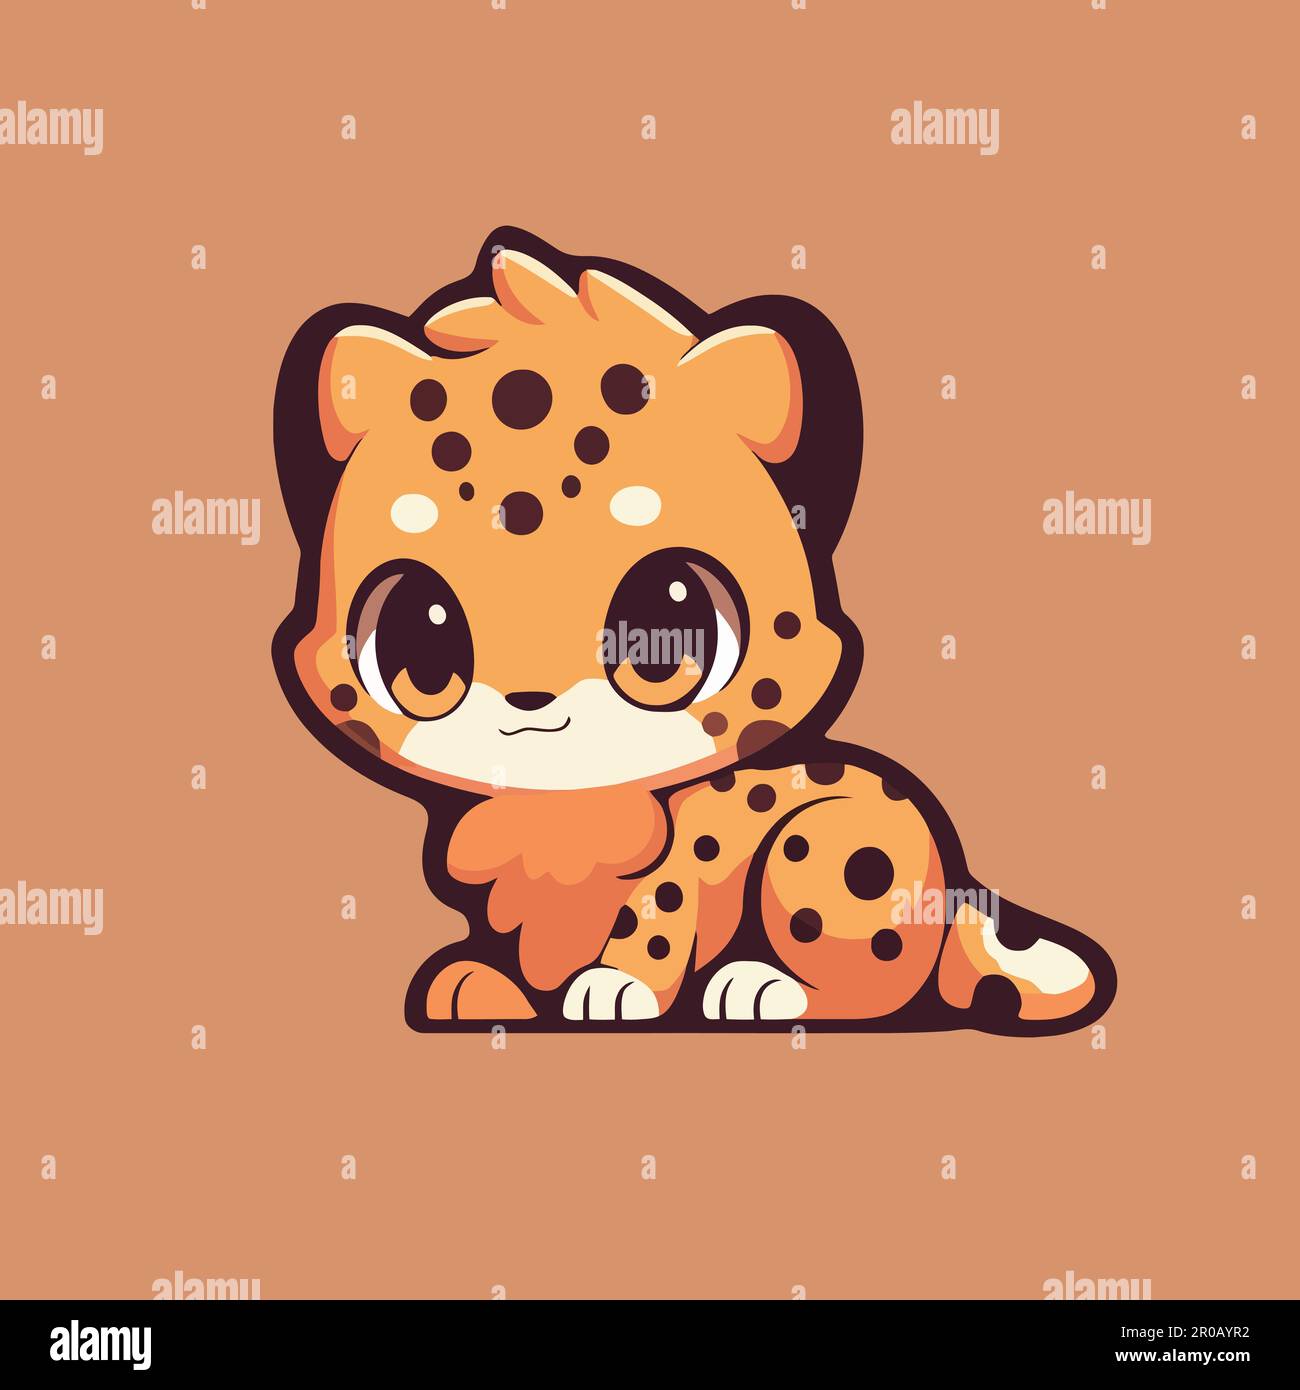 A cartoon illustration of a cheetah with a cute face Stock Vector Image ...